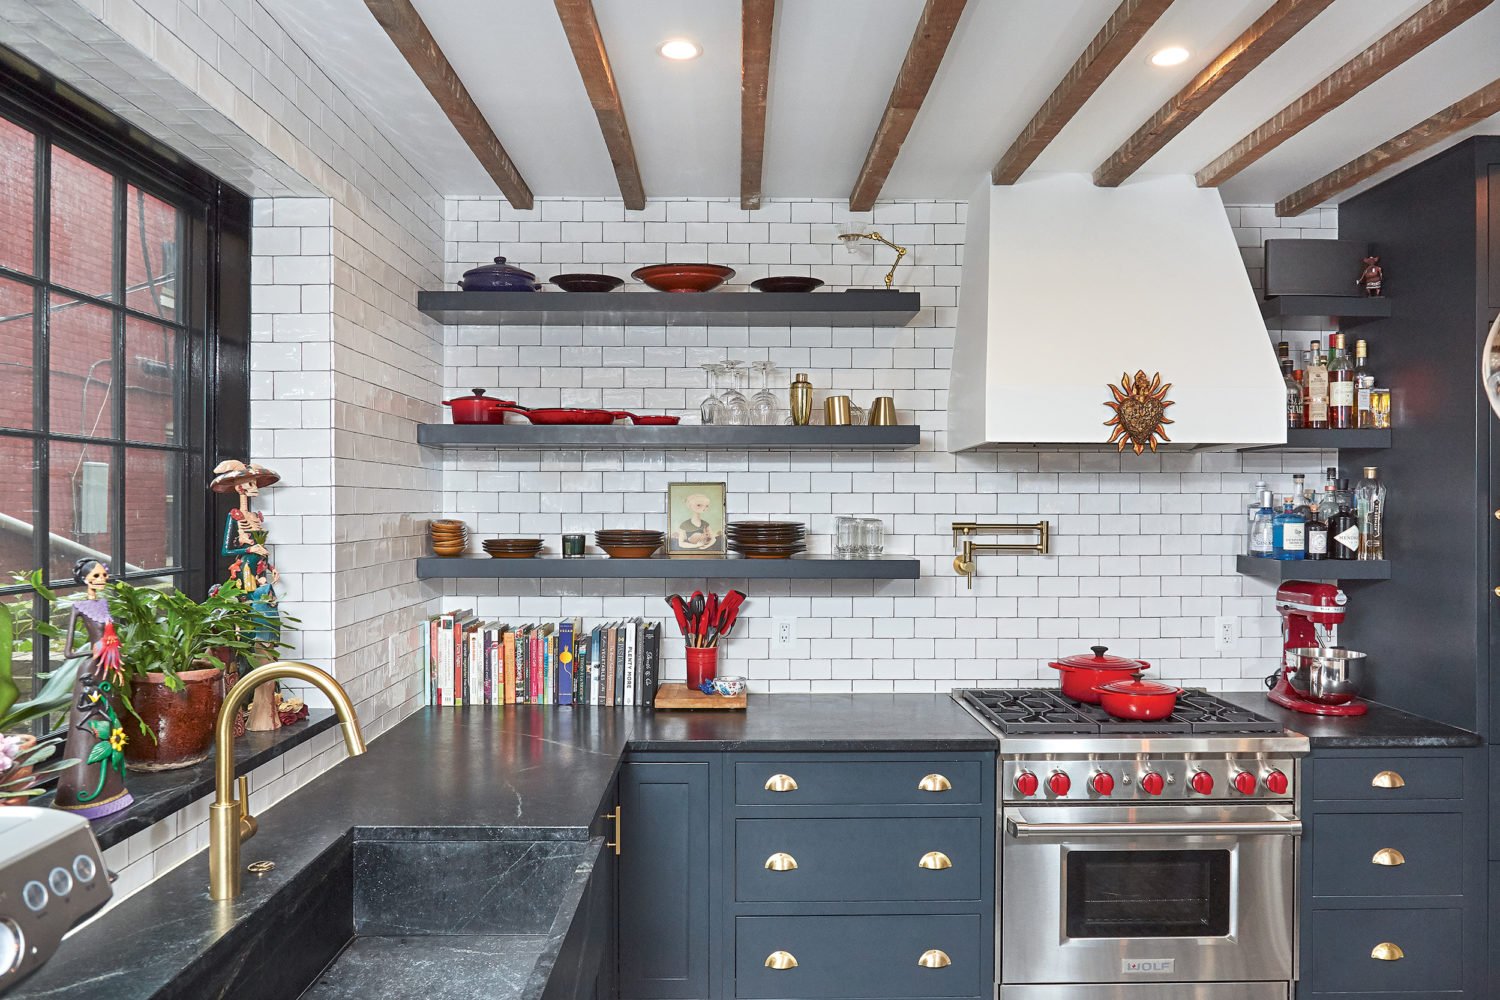 A dramatic Capitol Hill kitchen. Photograph by Jeff Elkins.